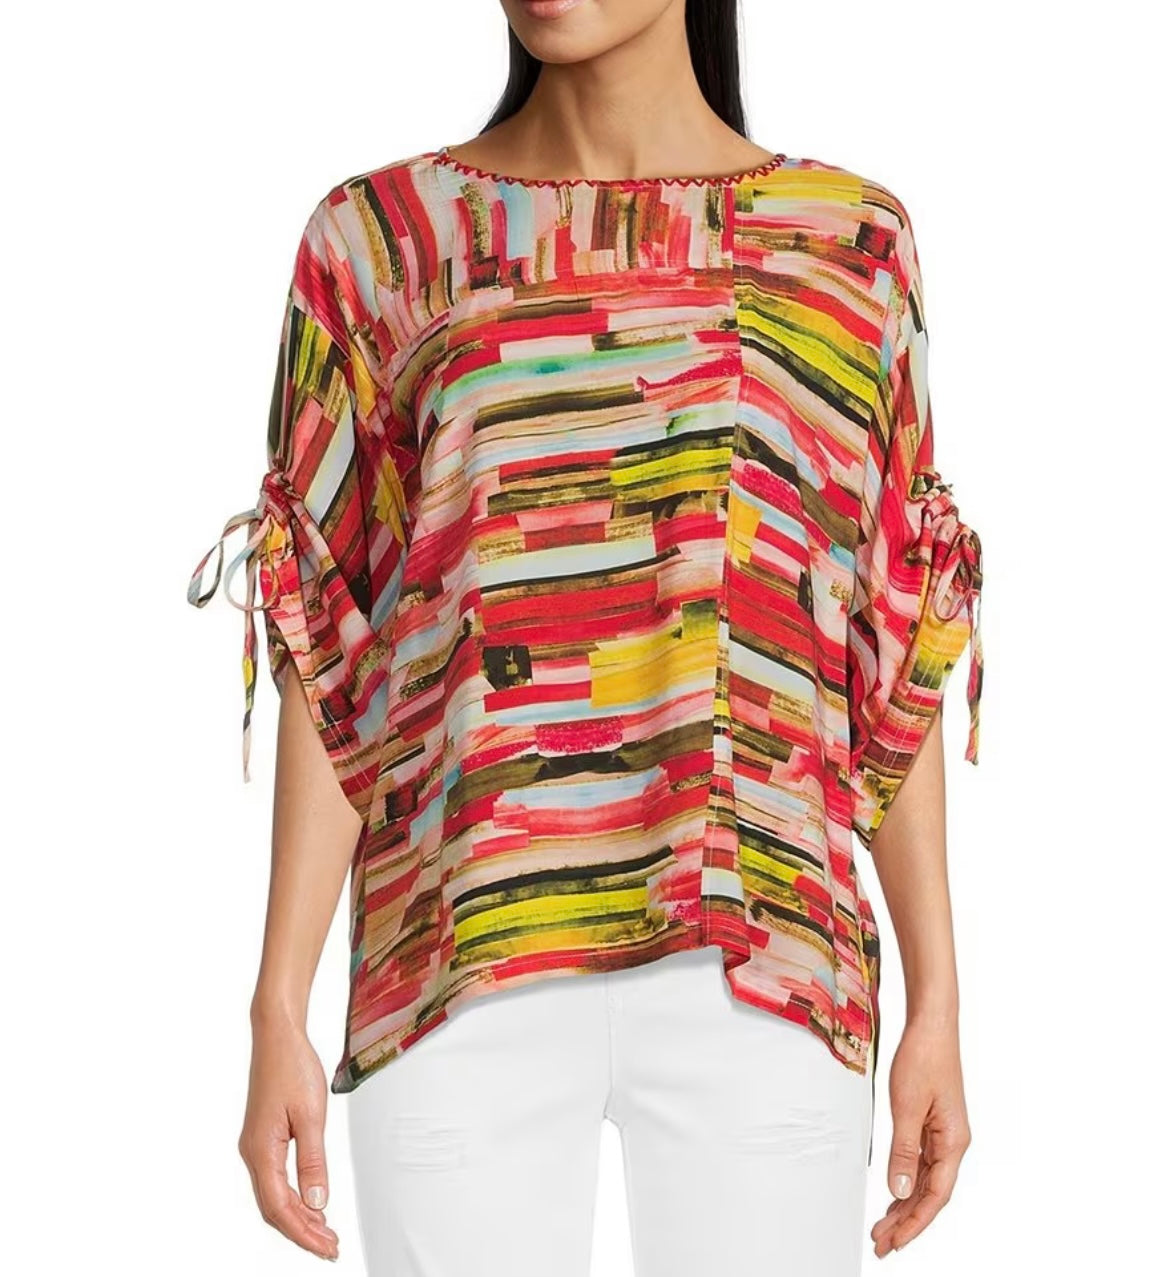 Tru Luxe Multicolored Boxy Top With Draw String Sleeves